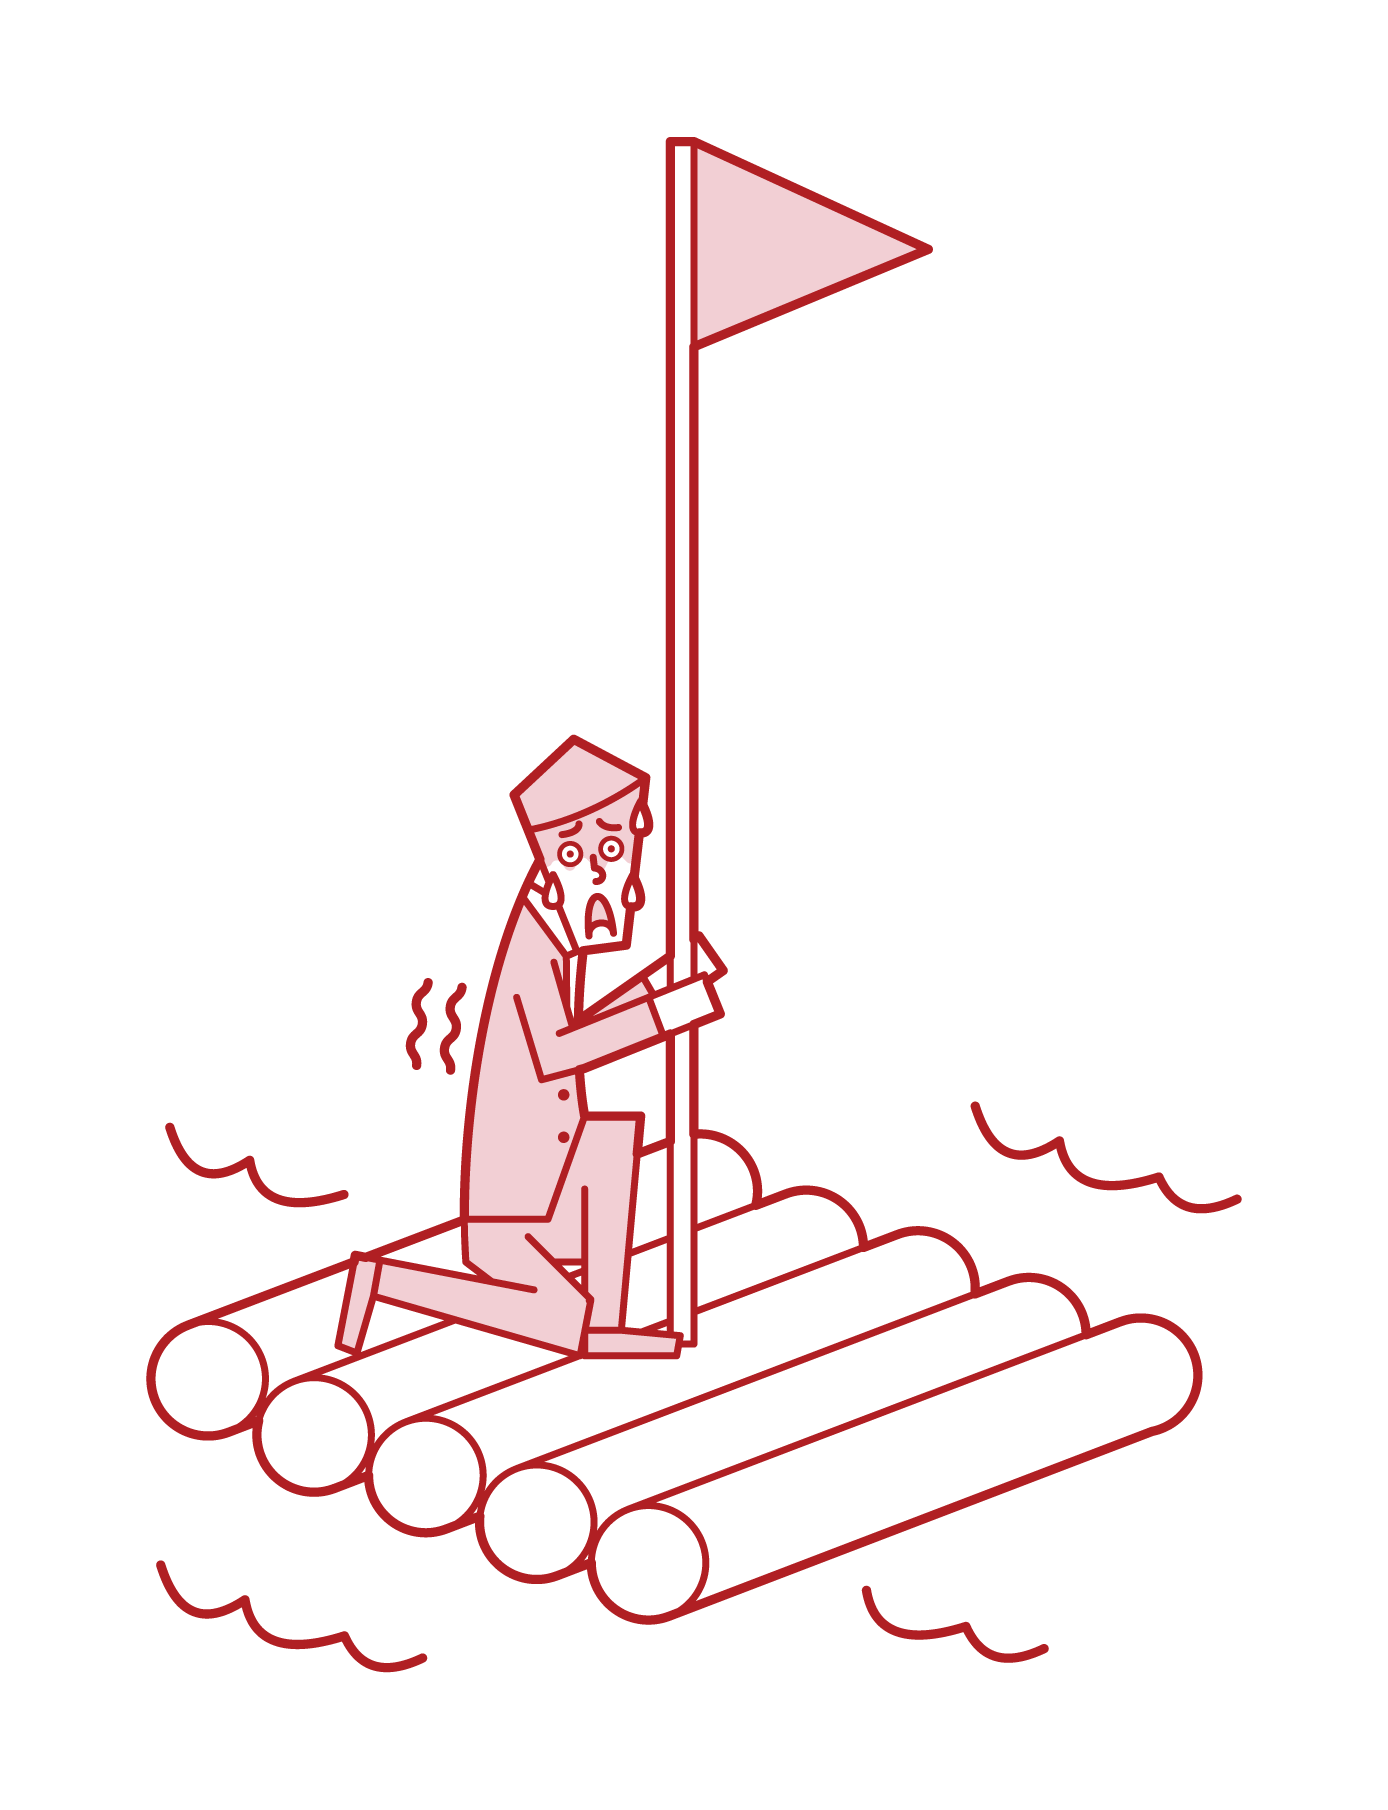 Illustration of a frightened man on a raft